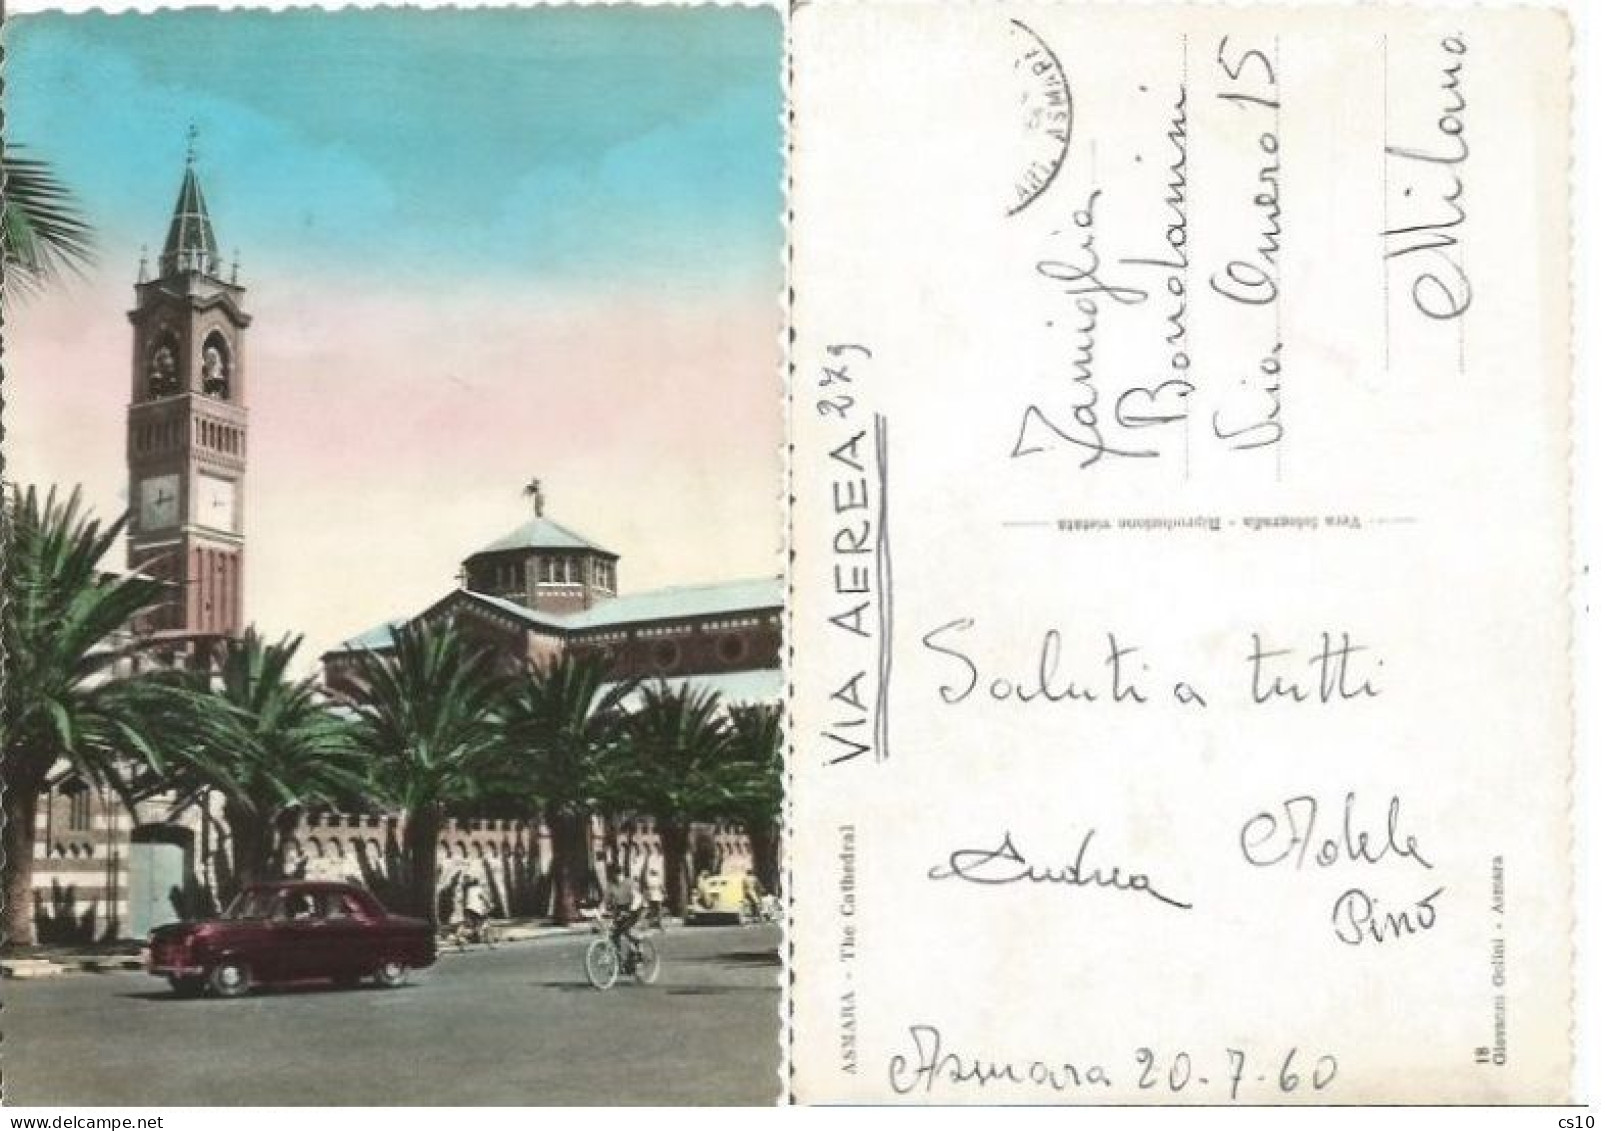 Eritrea (Ethiopia Period) Asmara Cathedral + Cars & Bicycles - Stampless Color Airmail Pcard 20jul1960 To Italy - Etiopía